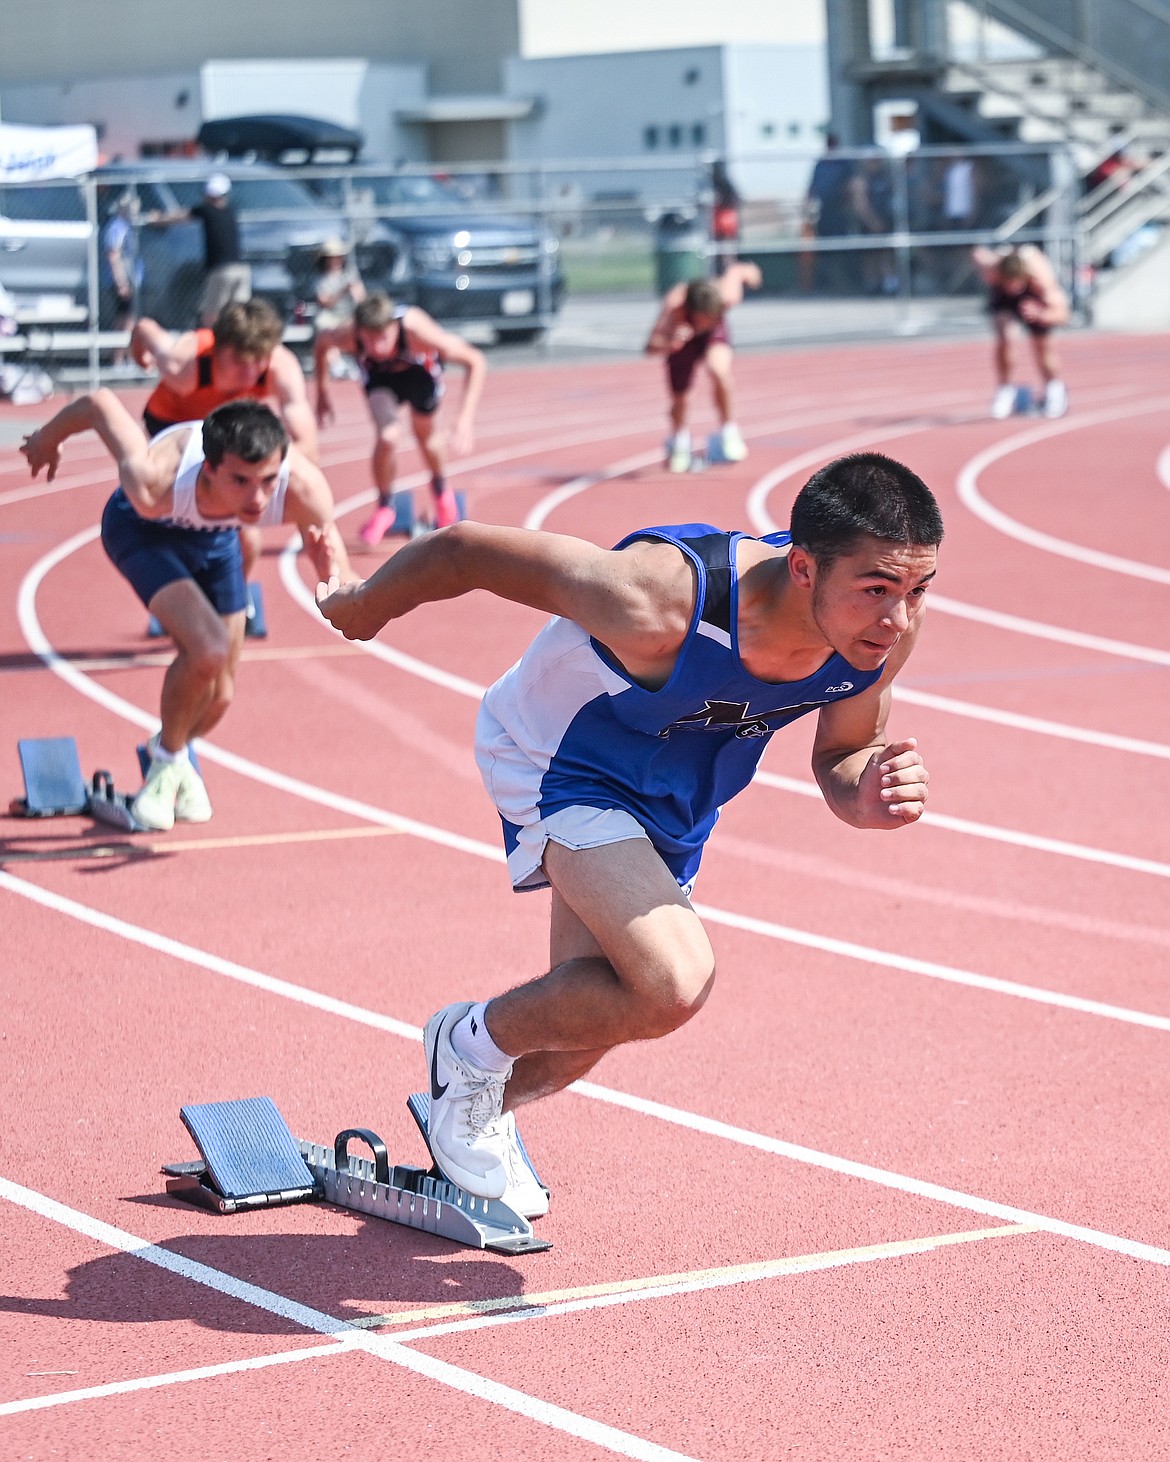 Mission's Iyezk Umphrey was sixth in the 400-meter run, earning a berth at state. (Christa Umphrey photo)